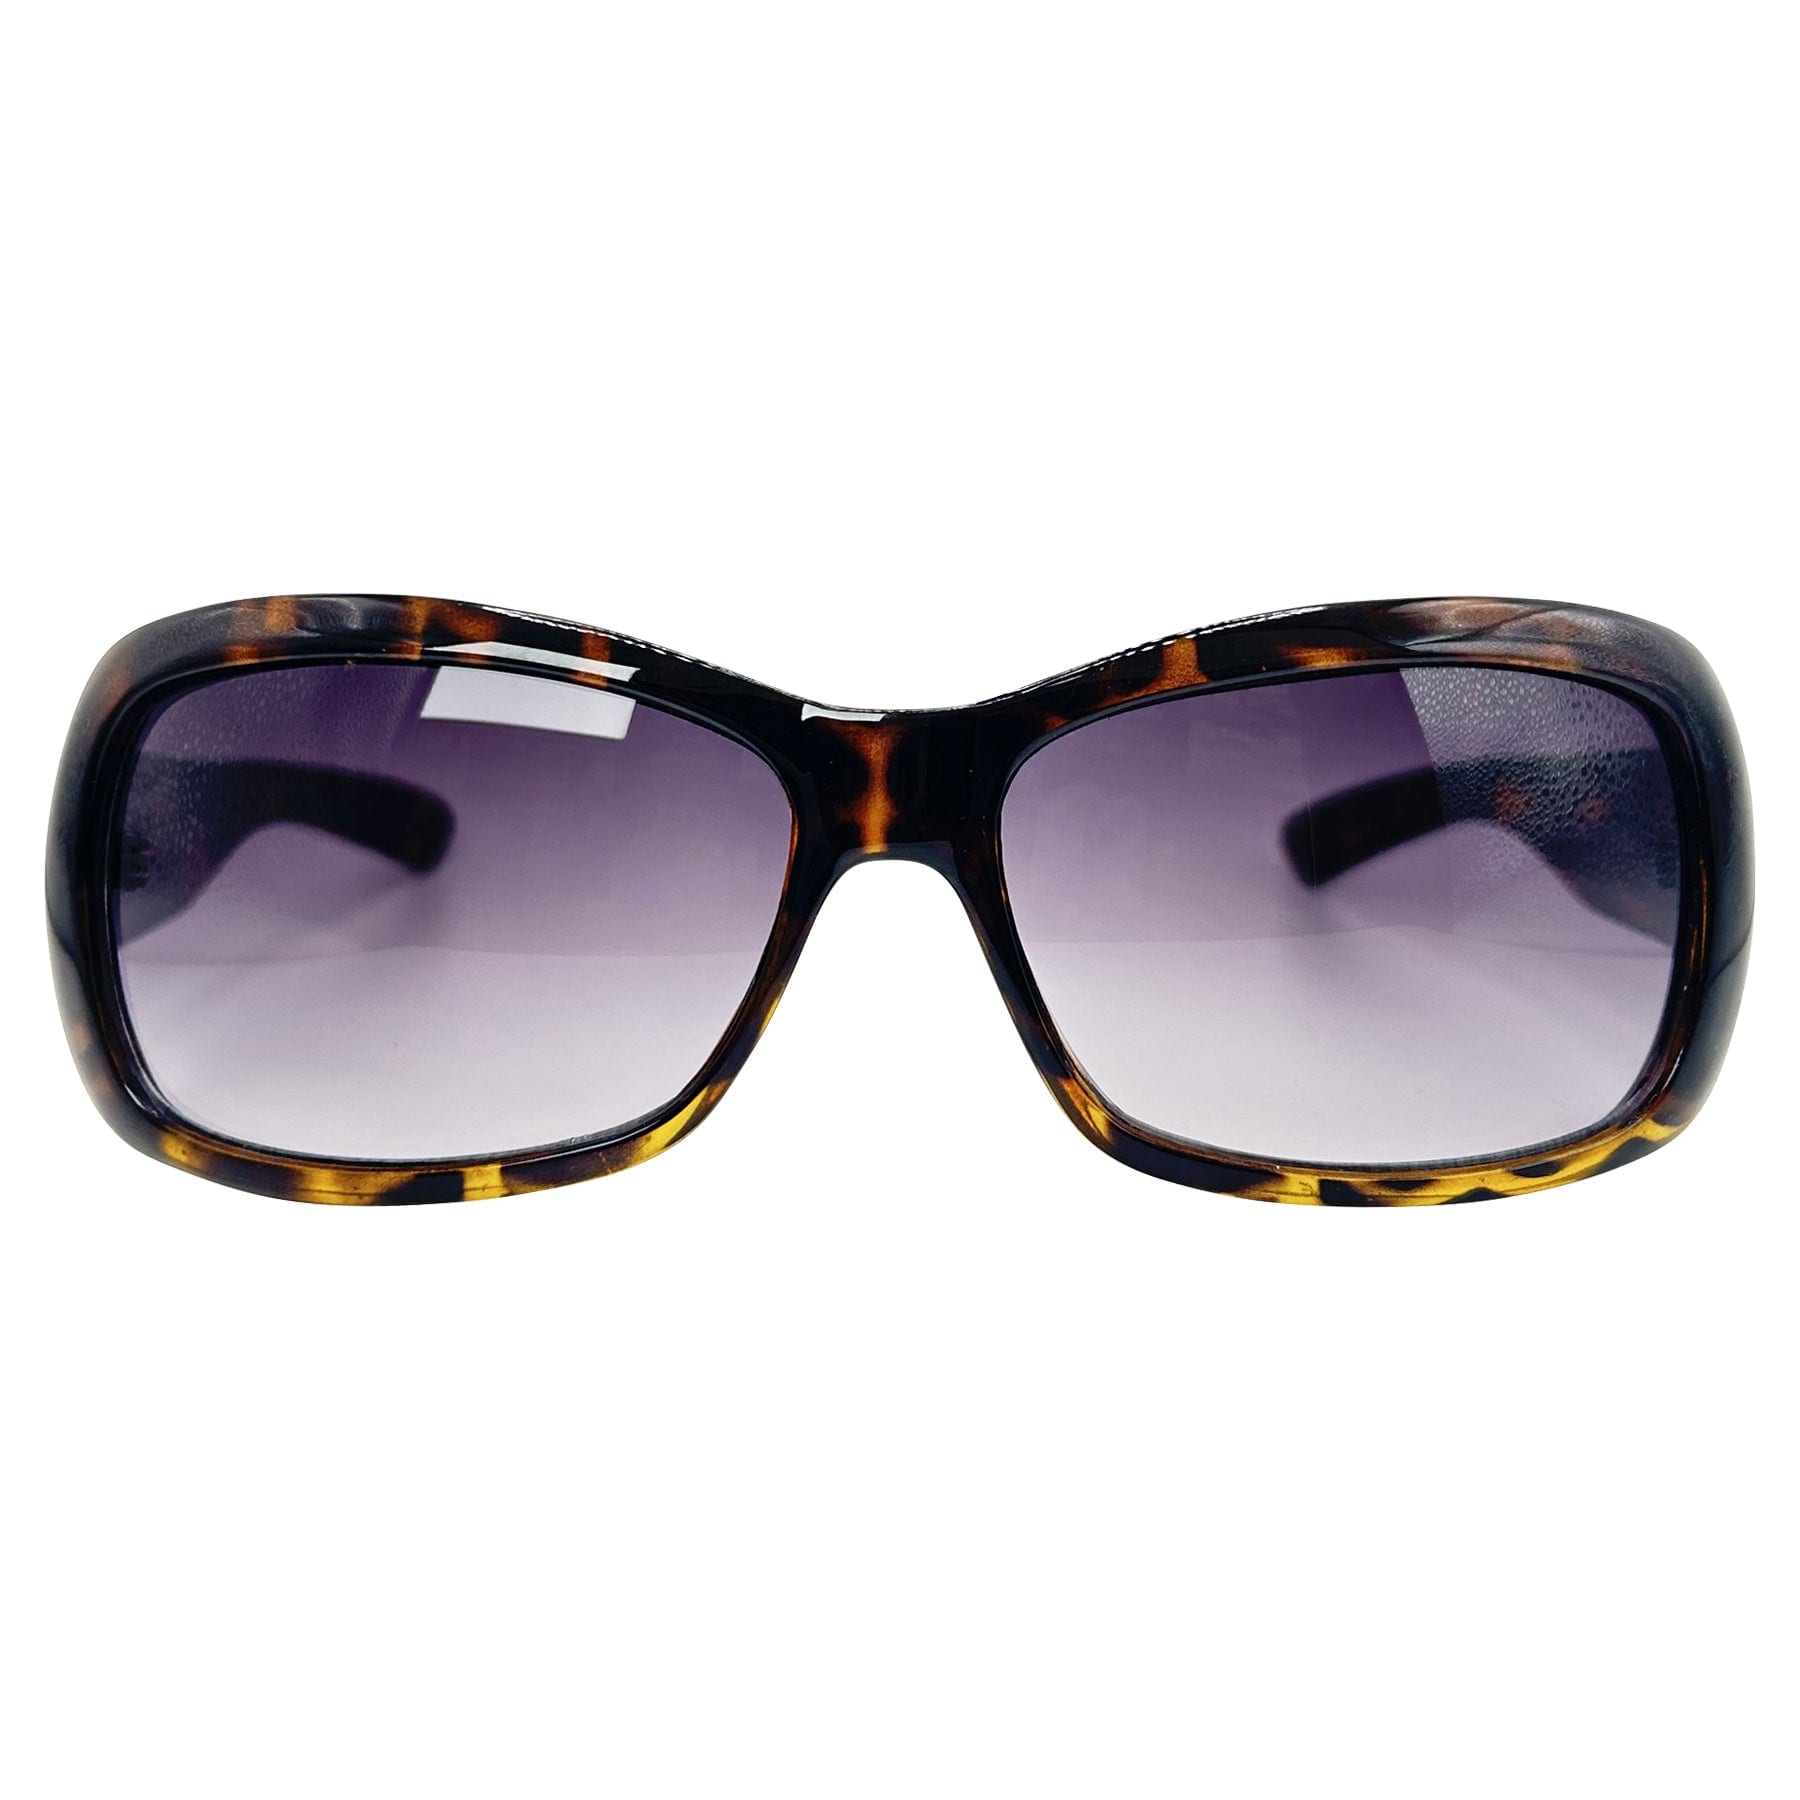 tortoise sunglasses with a soke lens and 90s style frame